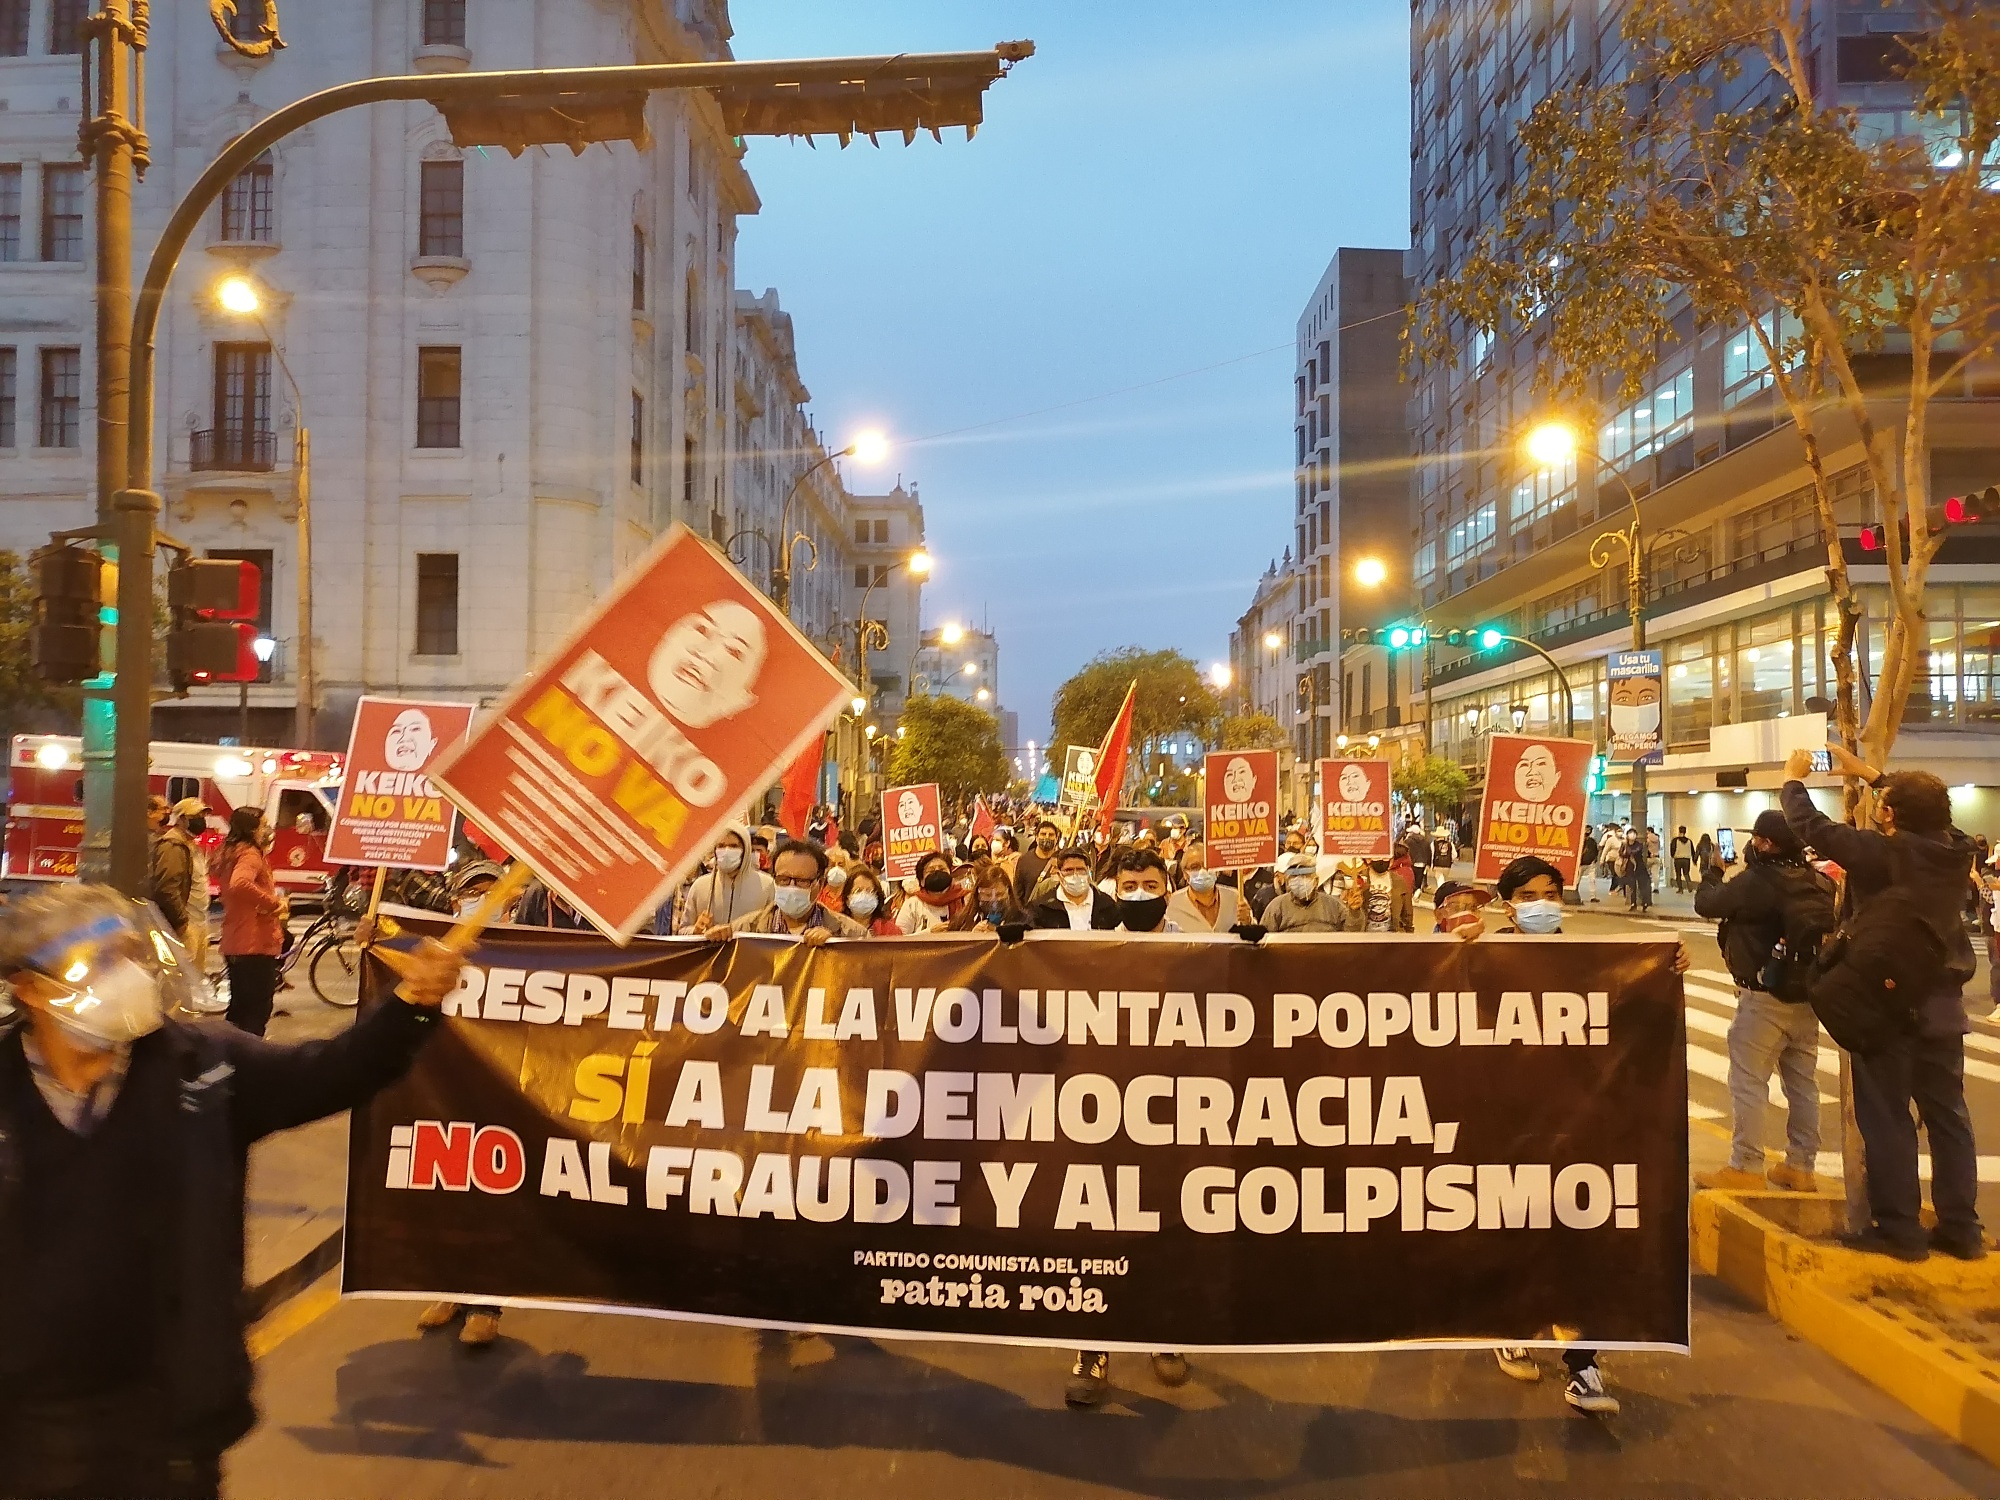 Communist Party of Perú-Patria Roja banner at recent demonstration. “Respect the popular will,” reads the banner. “‘Yes’ to democracy, ‘no’ to fraud and coups!” Source: www.facebook.com/partidocomunistadelperu.patriaroja